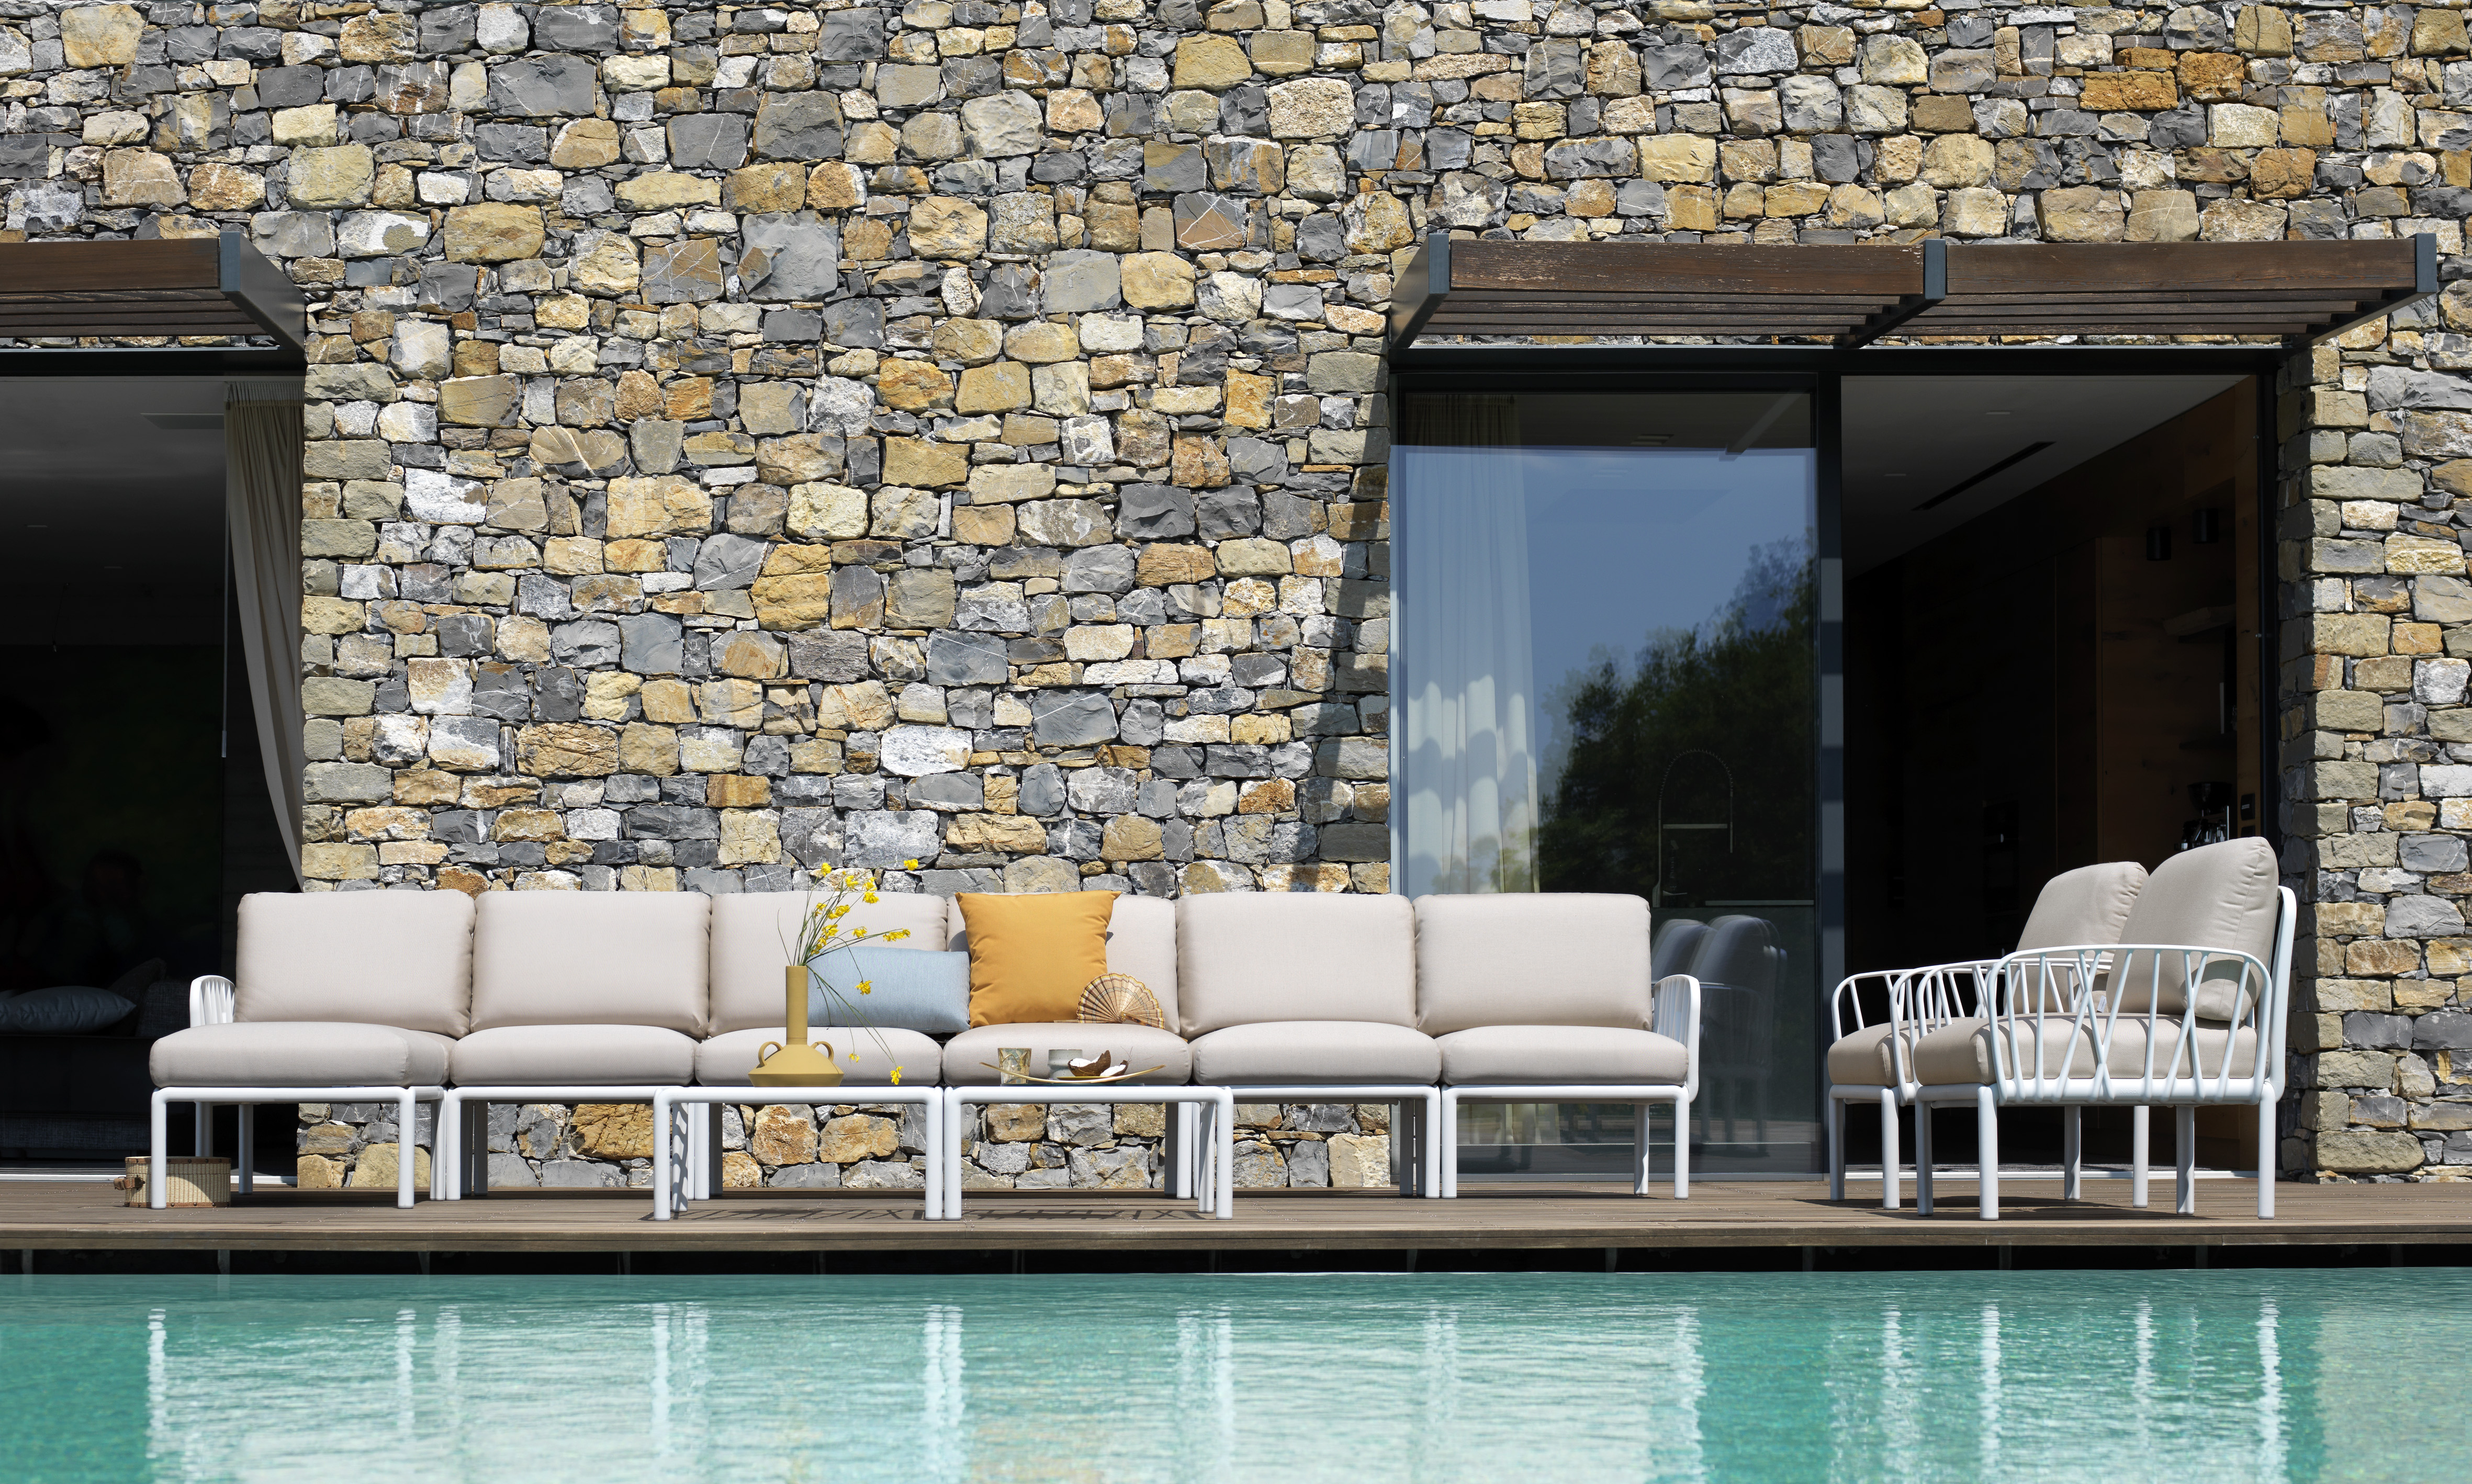 Add Italian Design to Your Outdoor with Nardi Outdoor Furniture